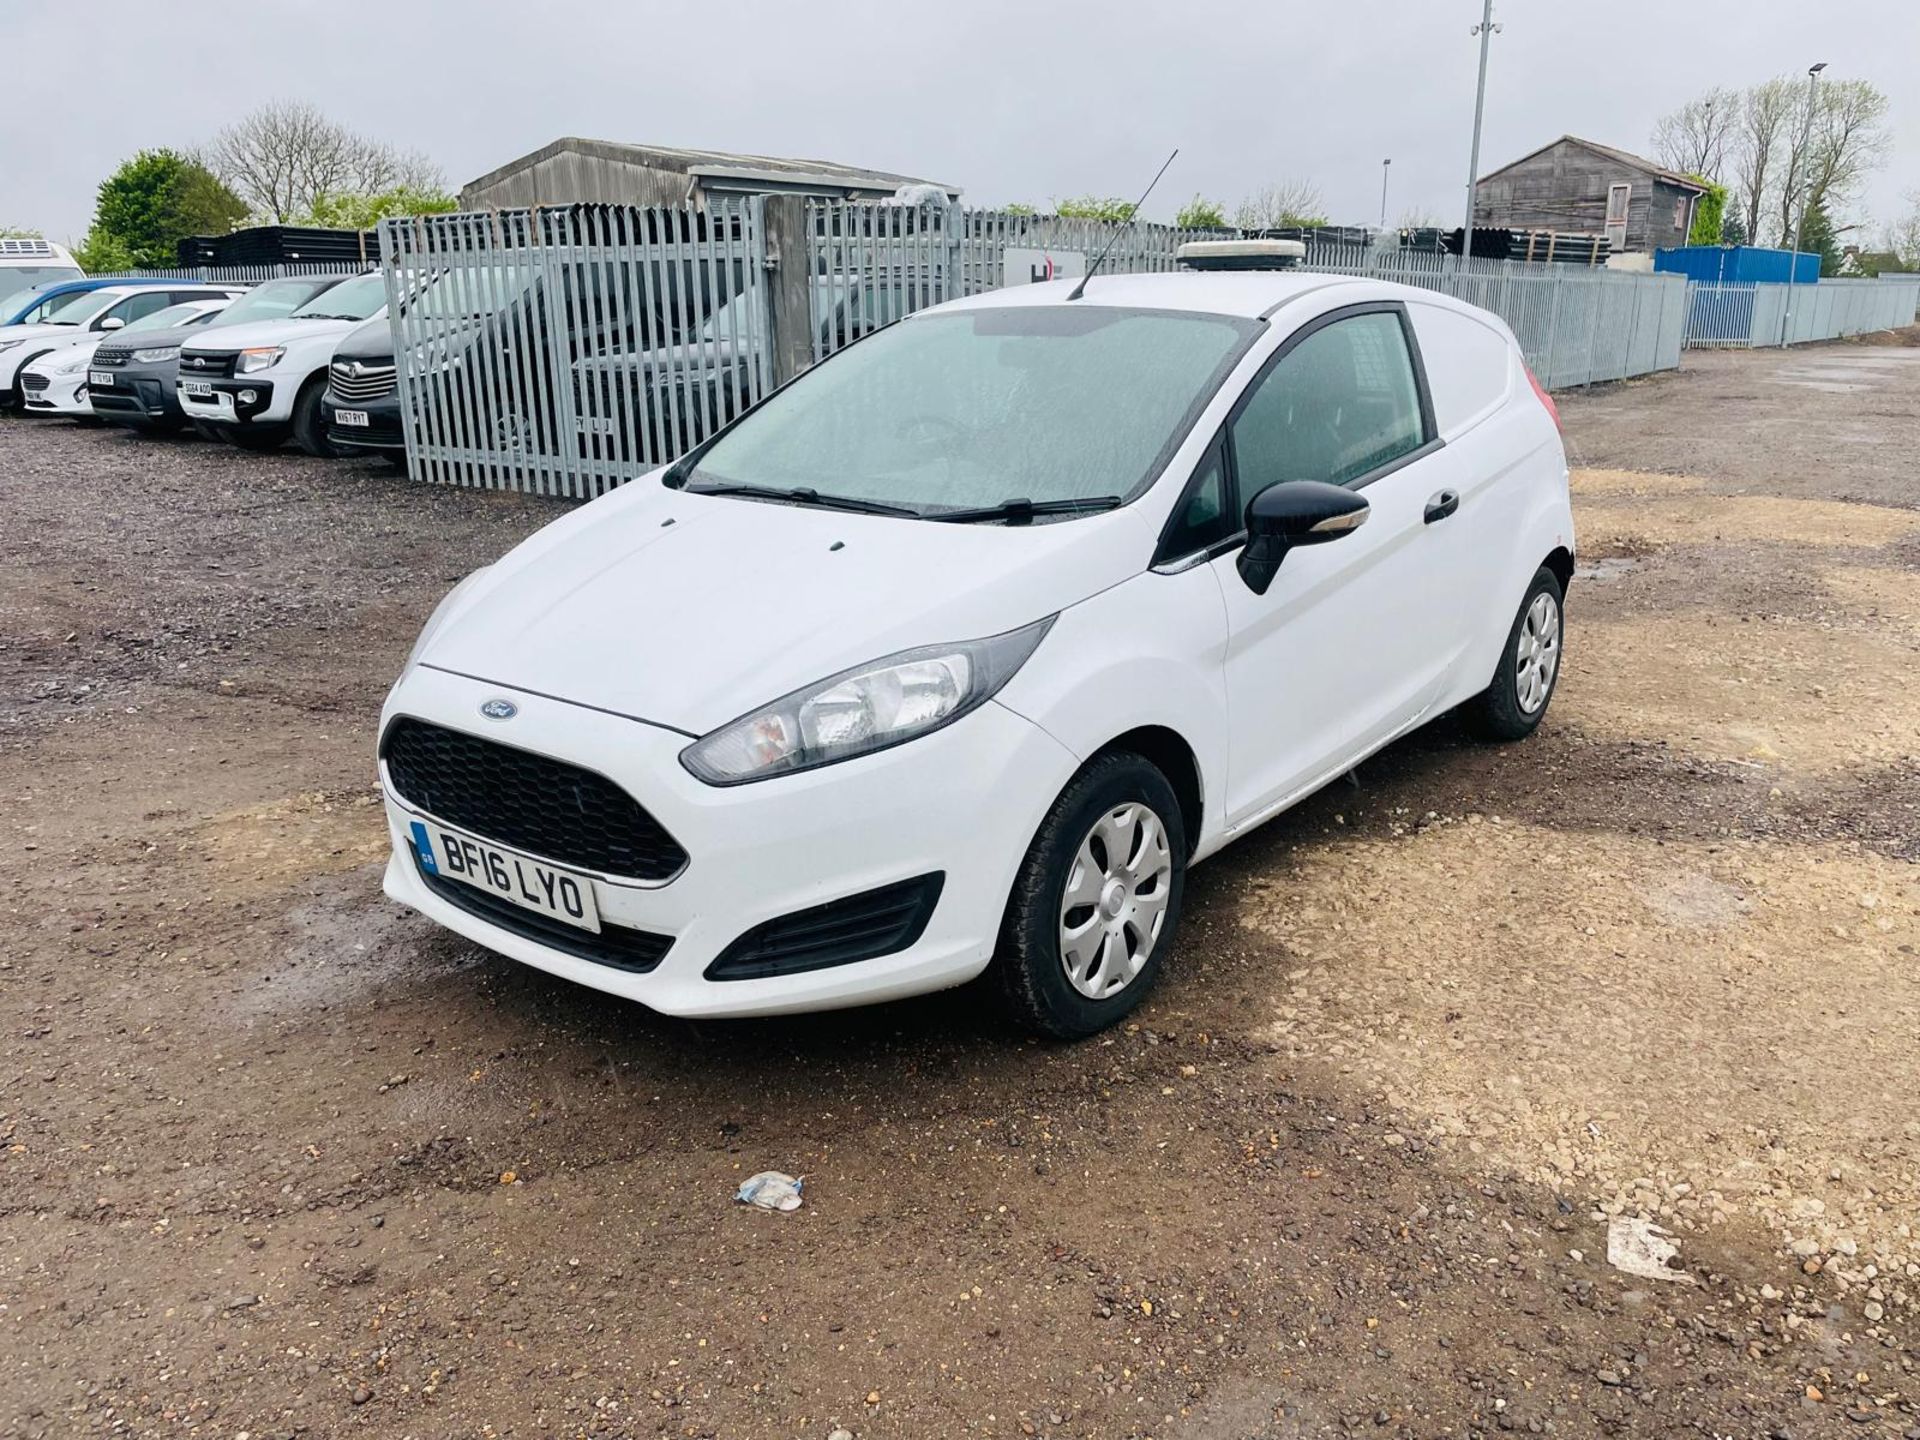 ** ON SALE ** Ford Fiesta 1.5 TDCI EcoNetic 2016 '16 Reg' Very Economical - Parking Sensors - Image 3 of 25